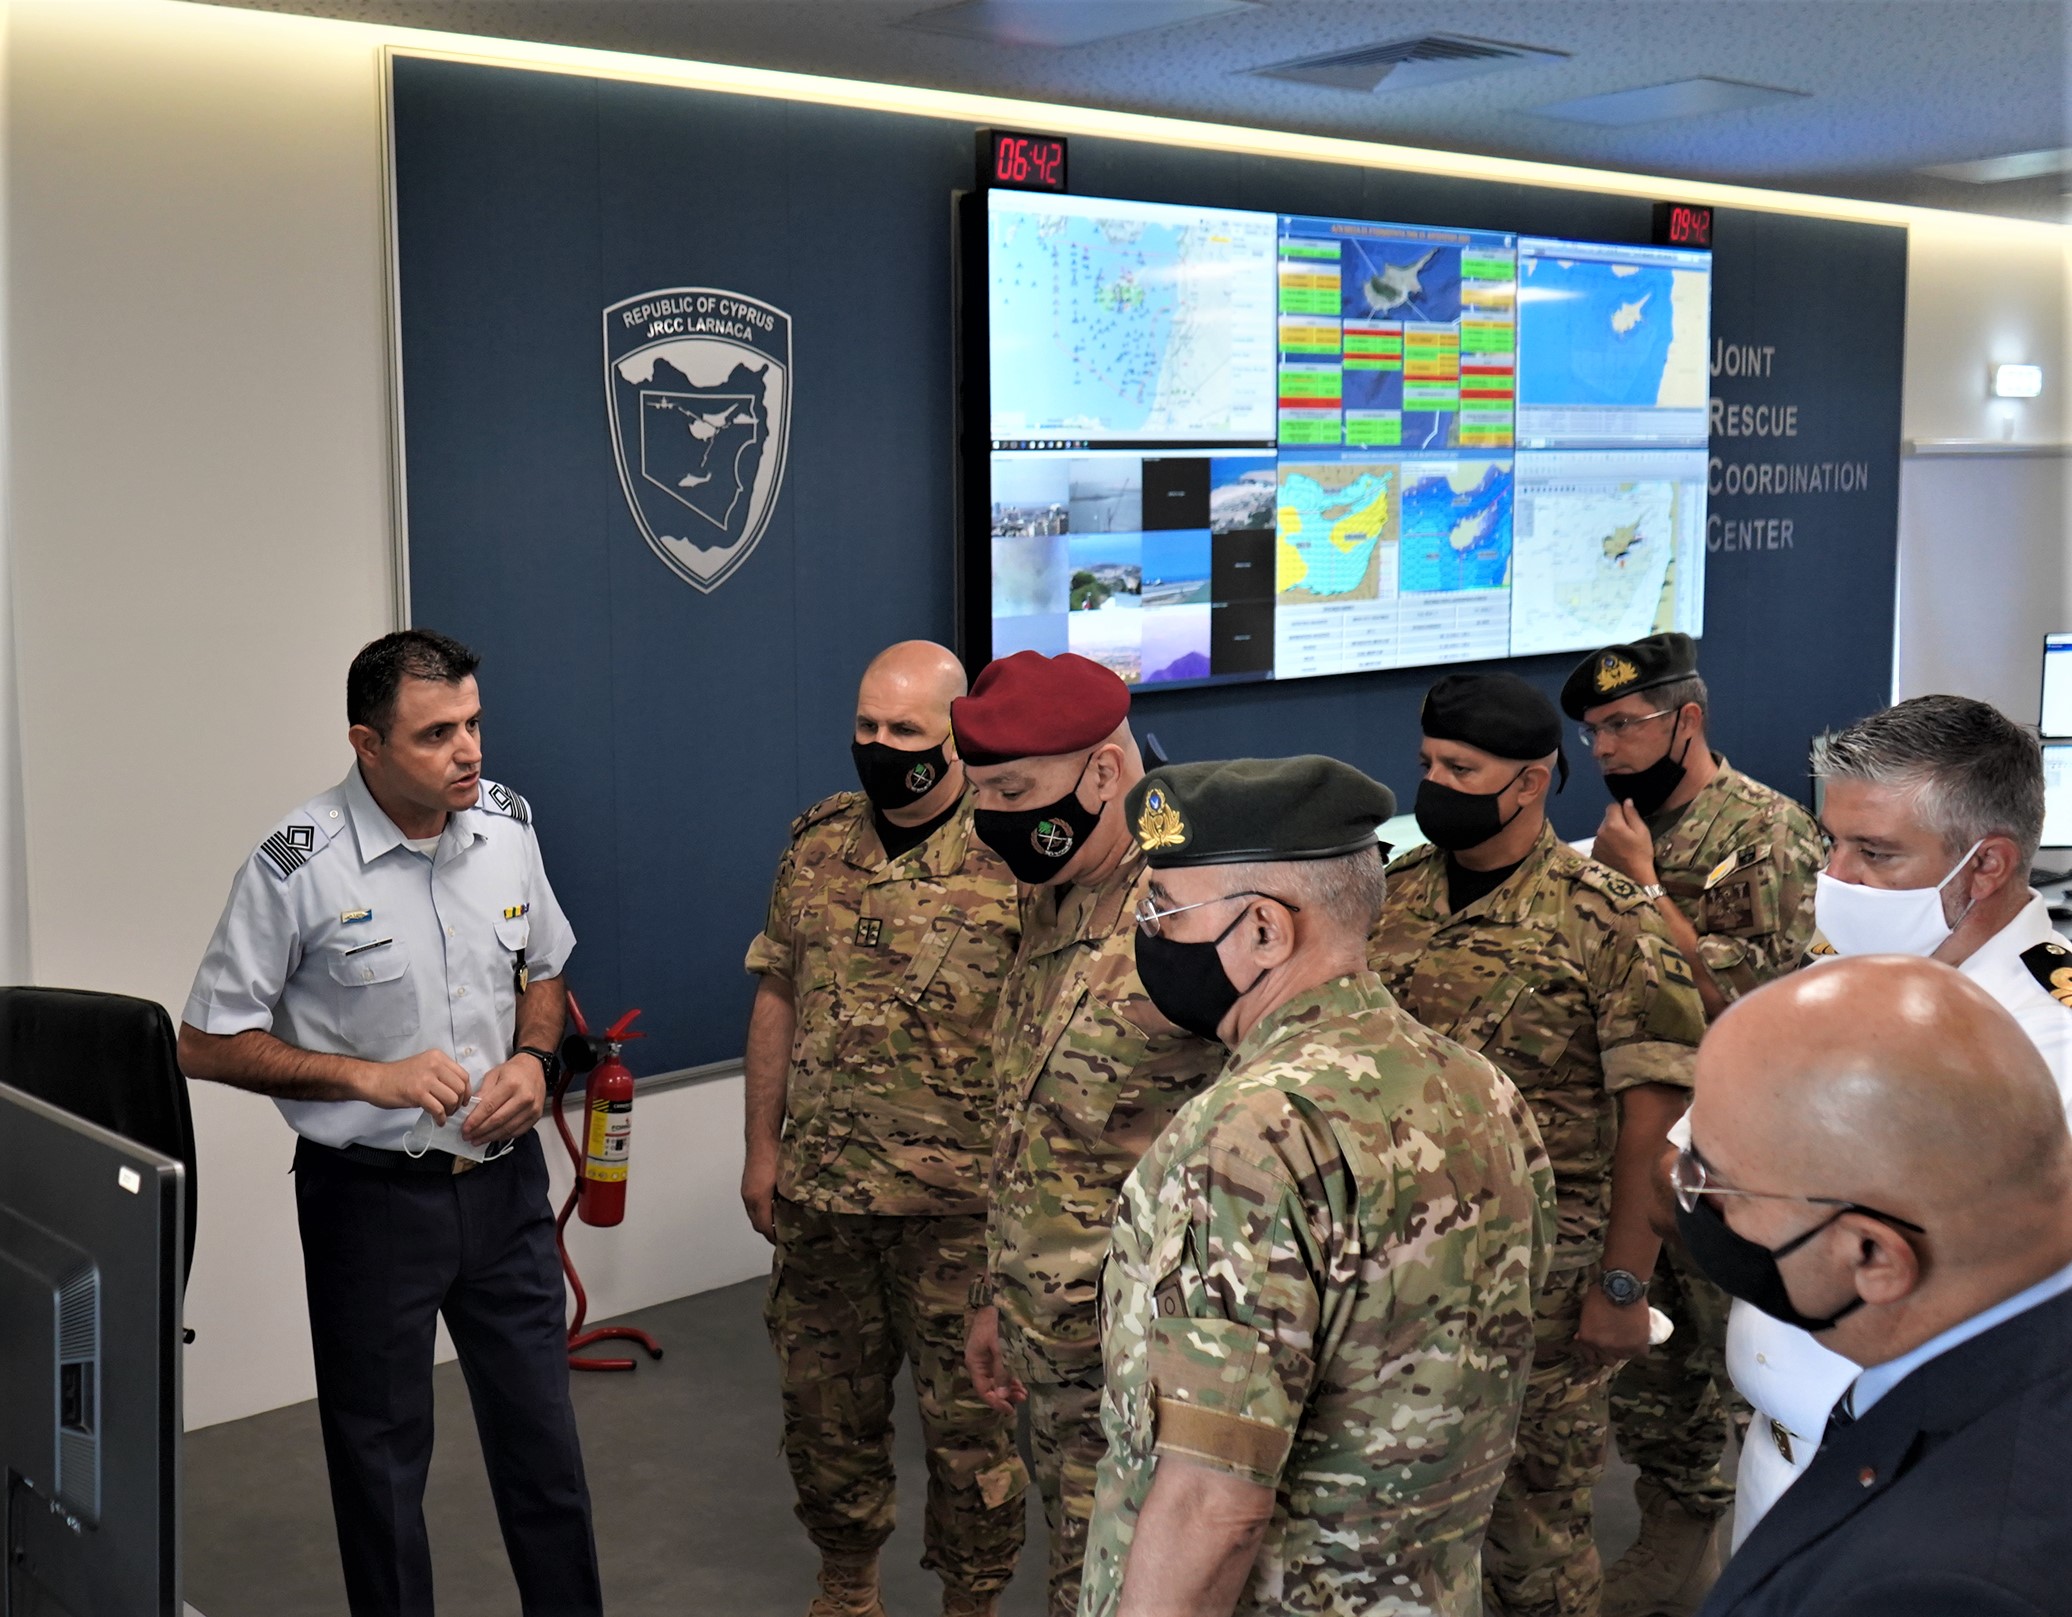 Visit of the Chief of the Lebanese Armed Forces to JRCC 